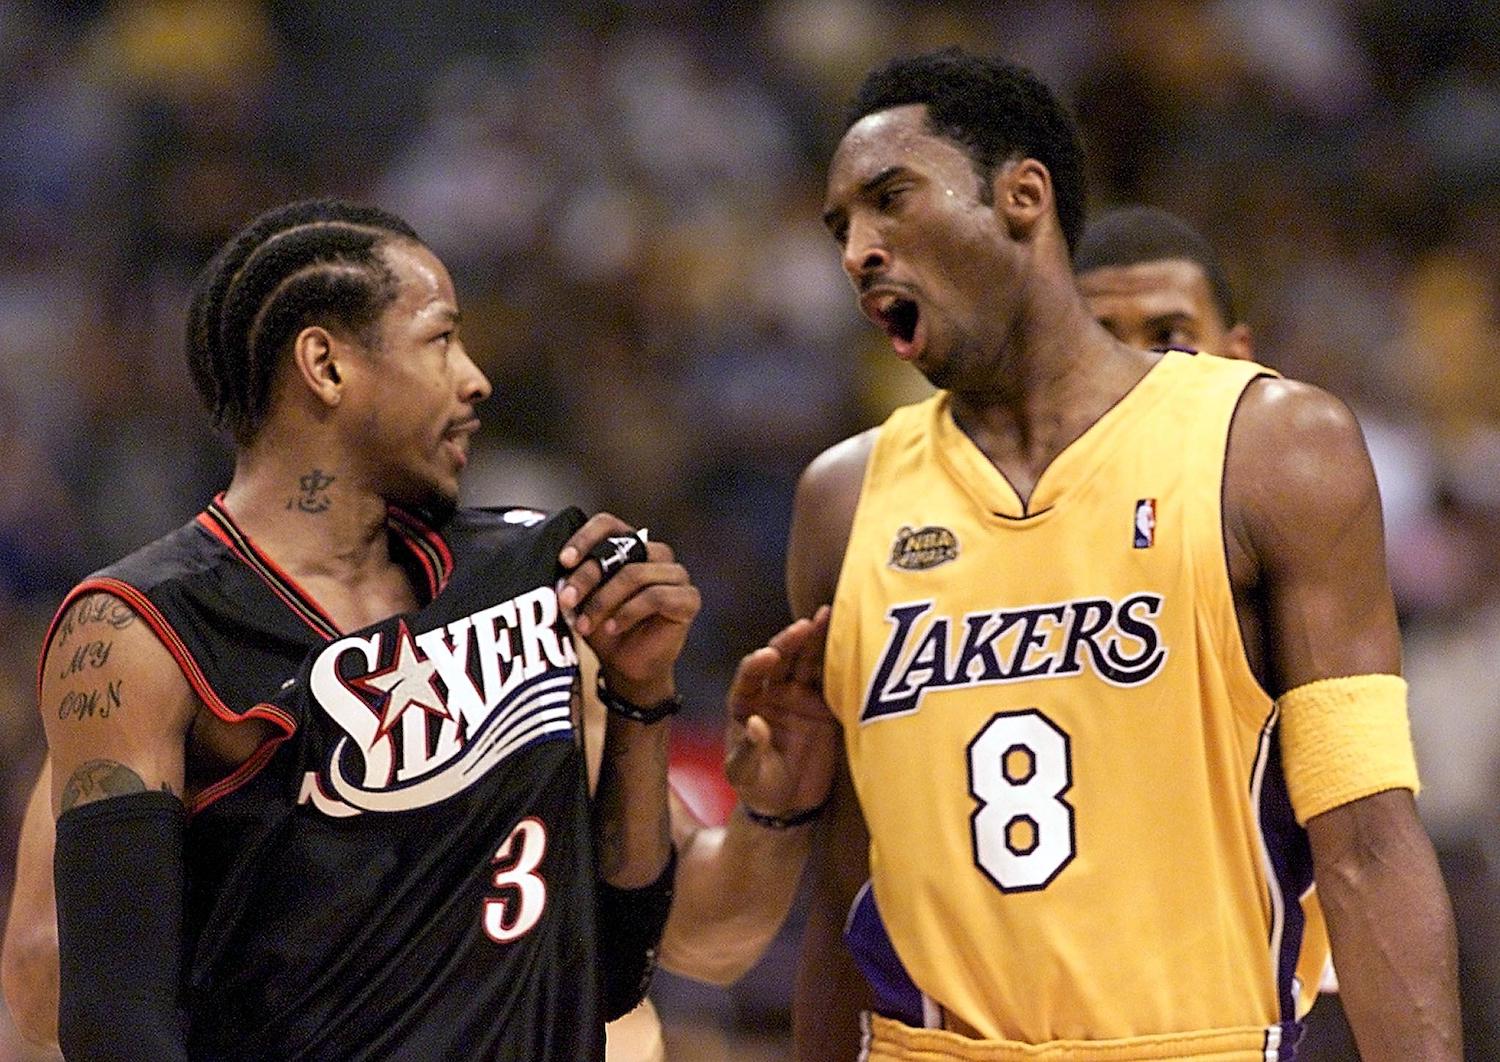 Allen Iverson (L) and Kobe Bryant (R) exchange words on the court.